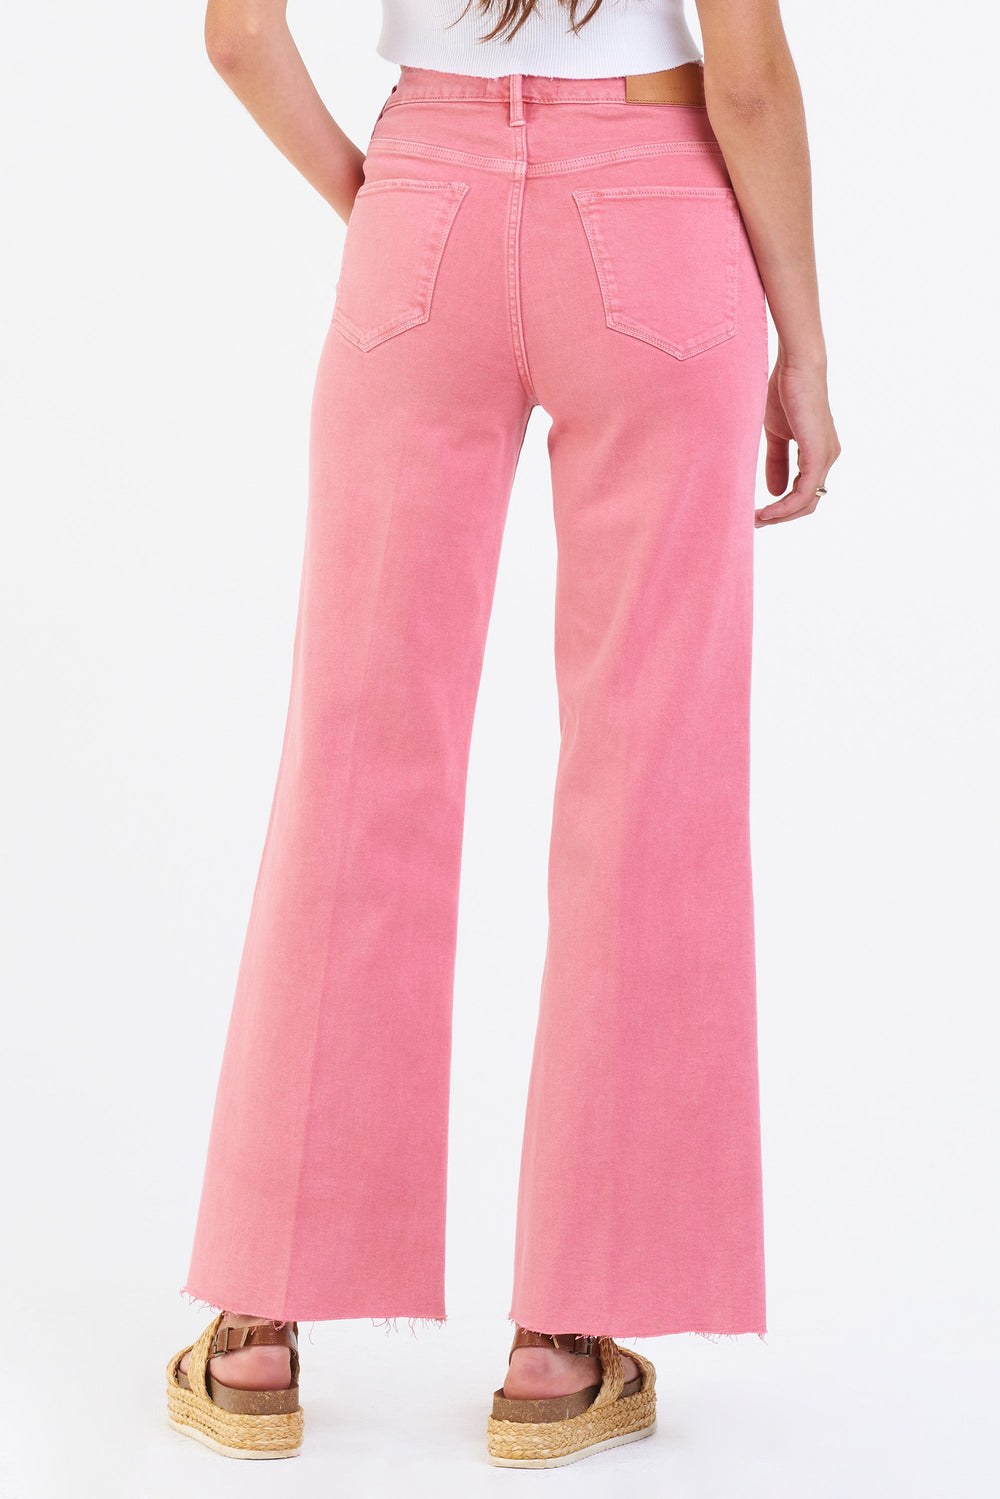 image of a female model wearing a FIONA SUPER HIGH RISE WIDE LEG JEANS RASPBERRY SORBET JEANS